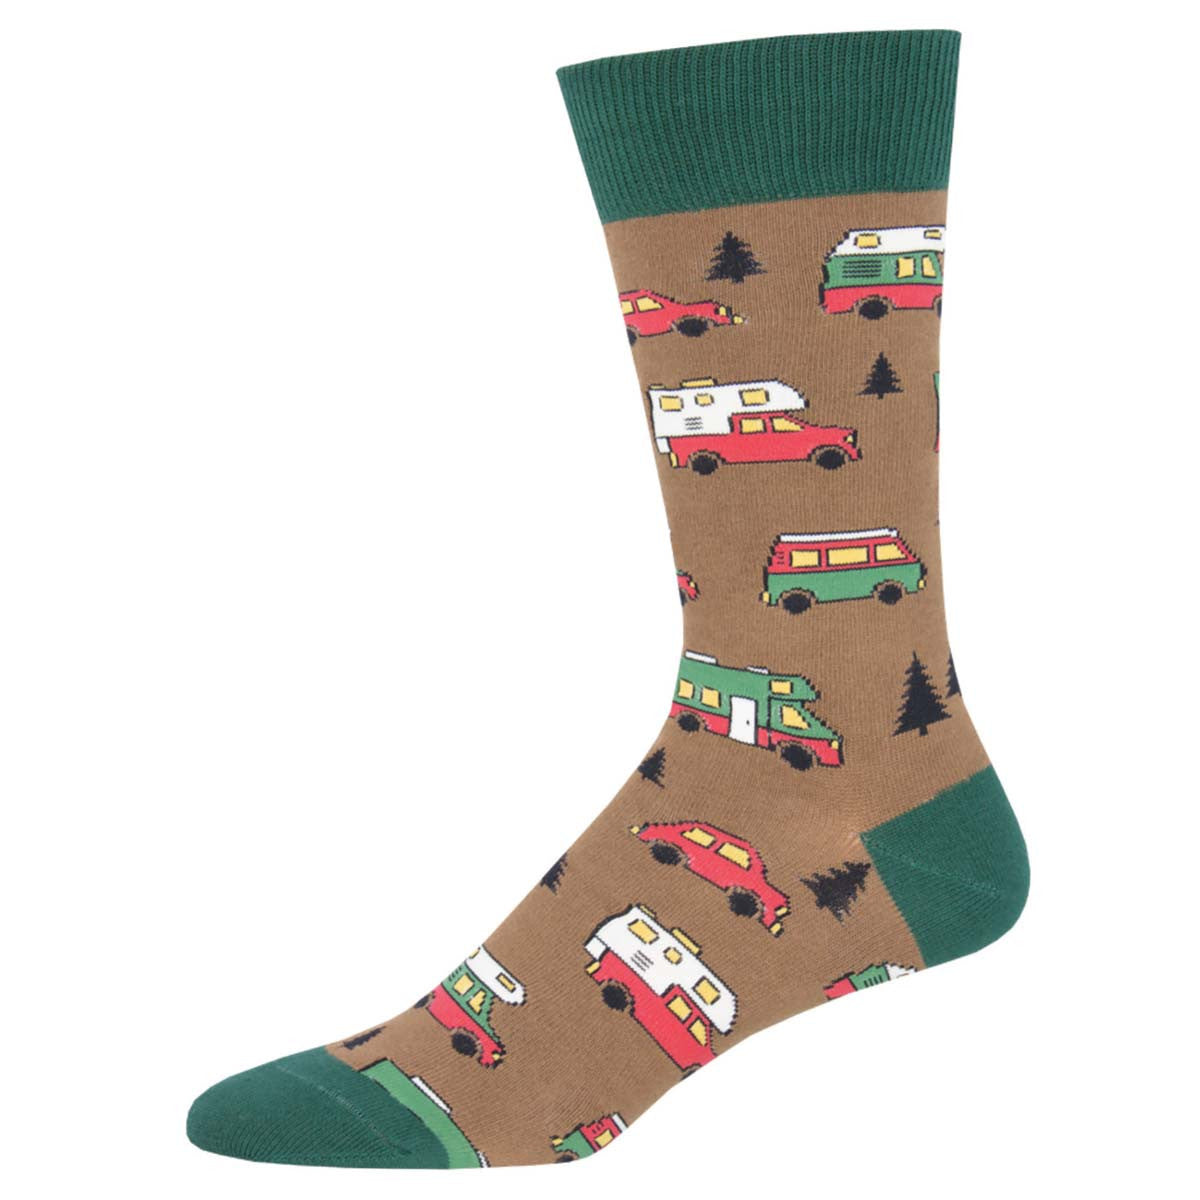 Are We There Yet? Men's Crew Socks